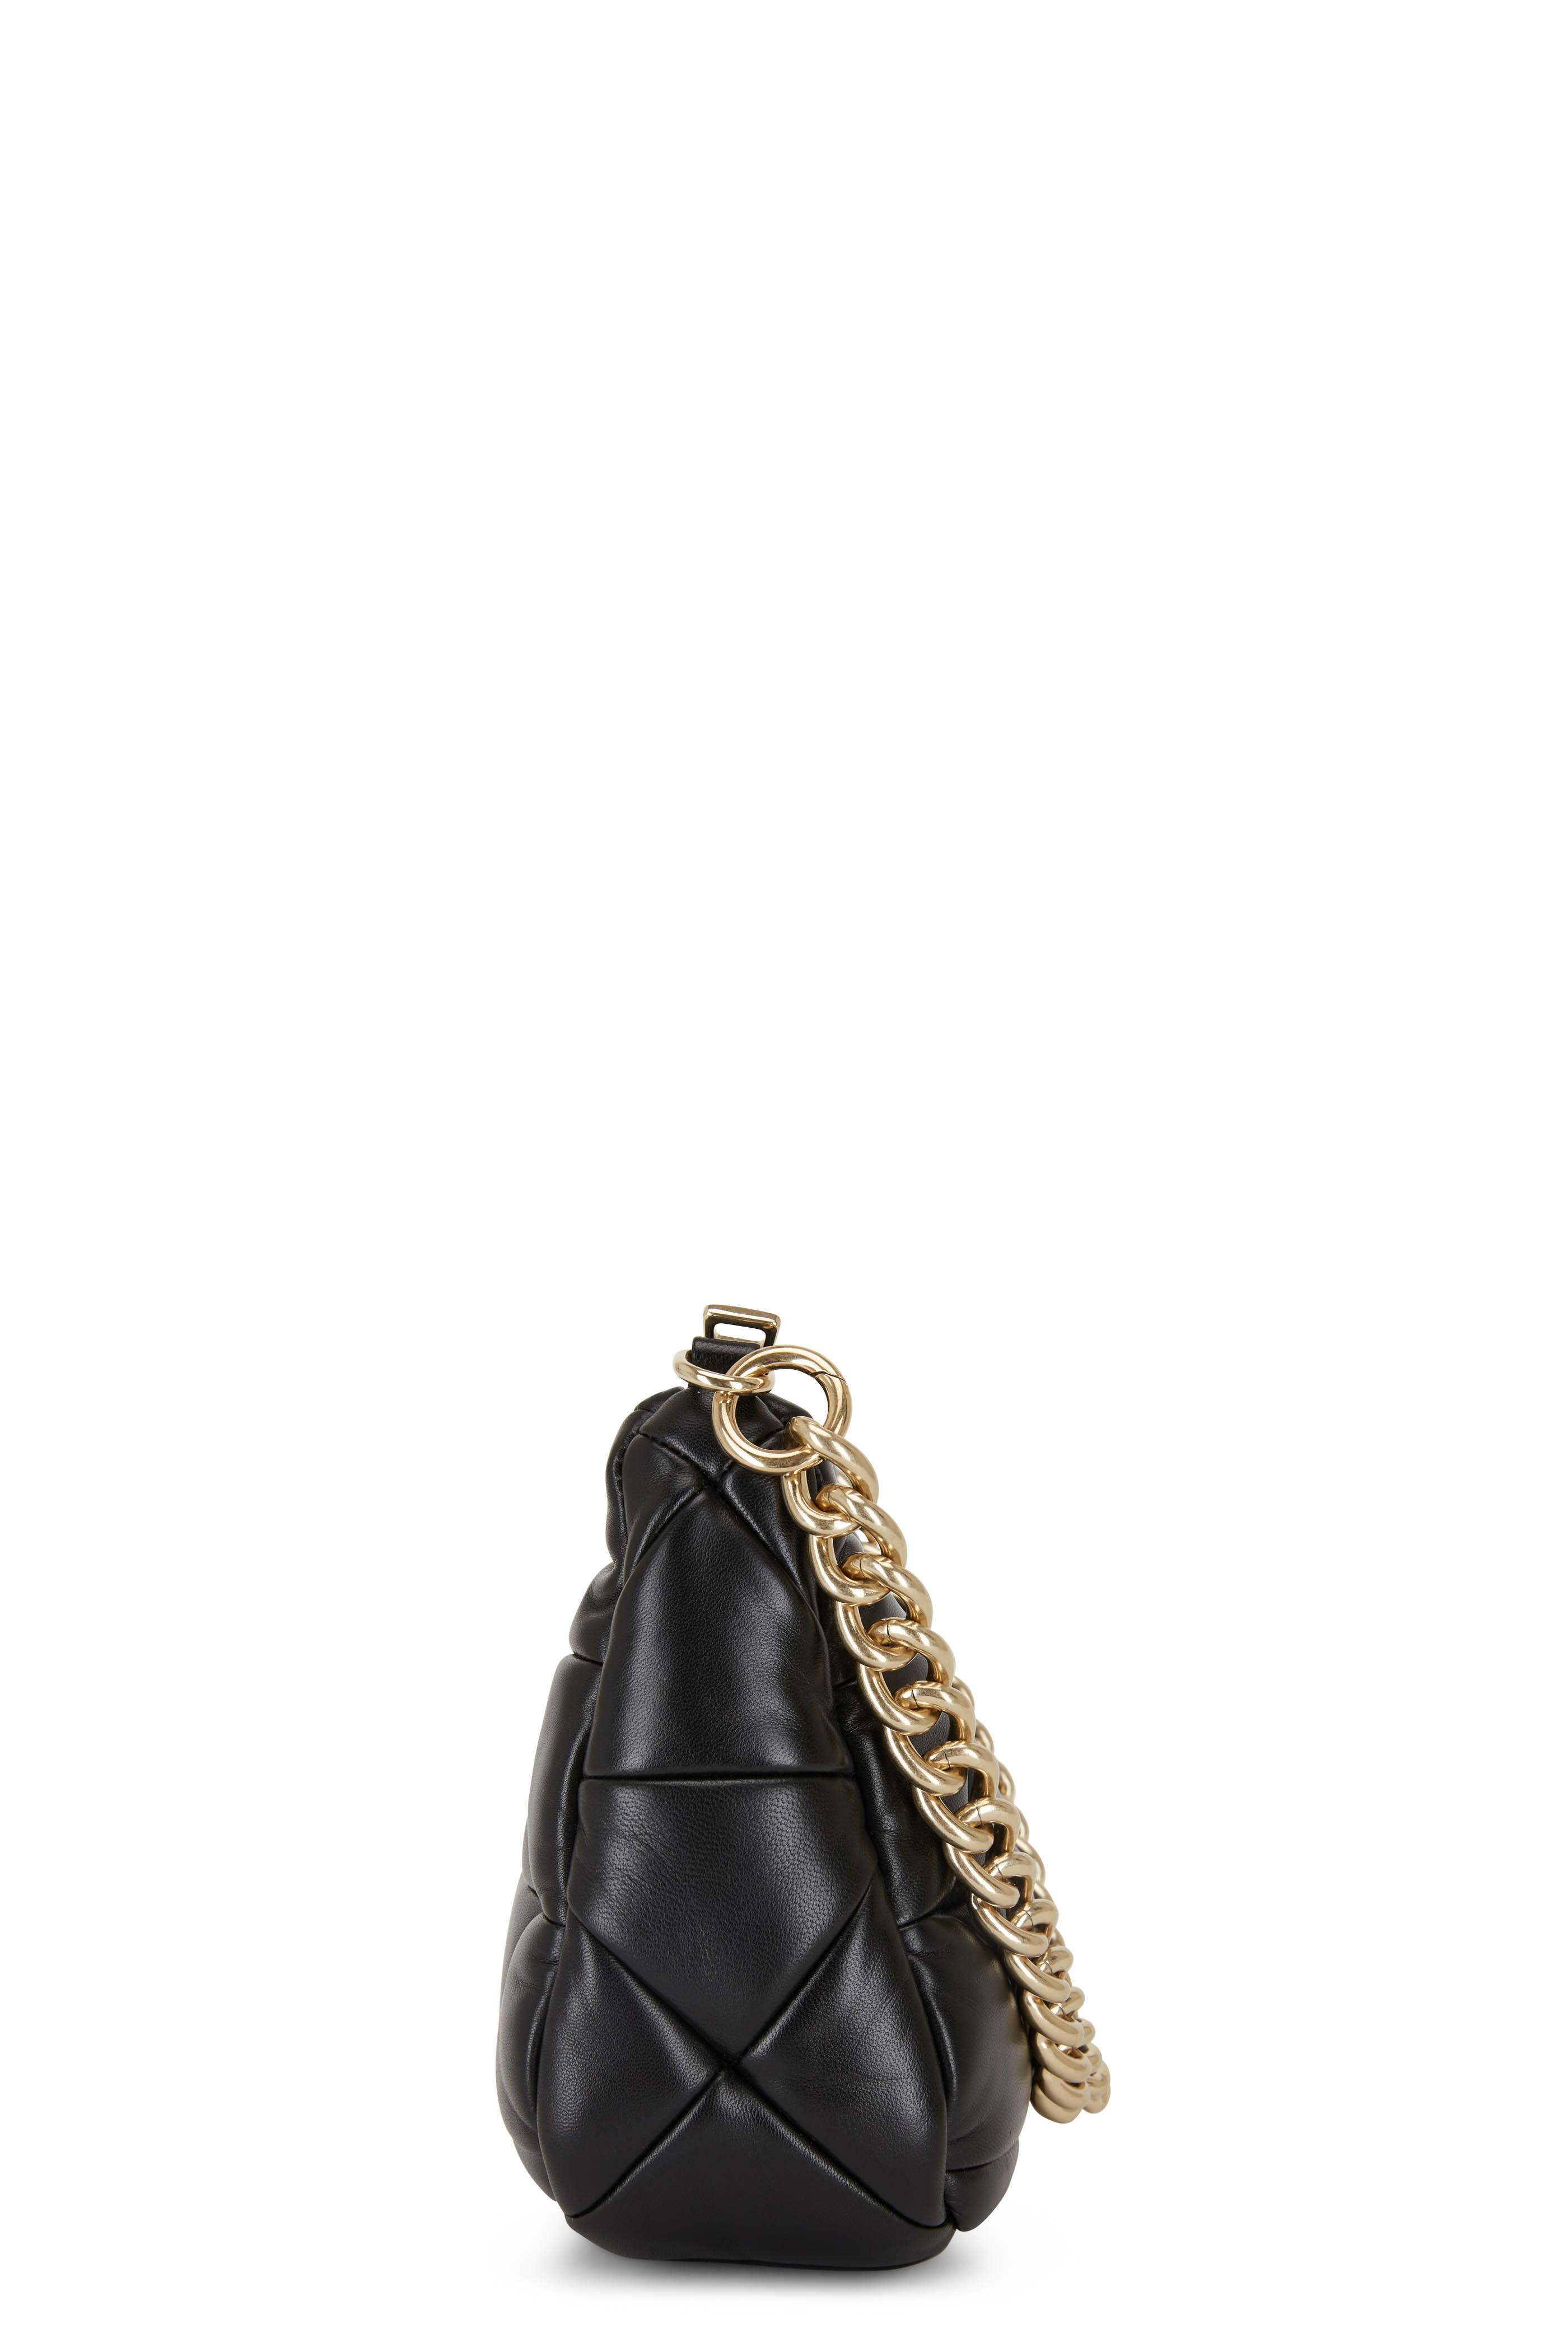 Buy Valentino Bags Ocarina Quilted Shoulder Cross-Body Bag from